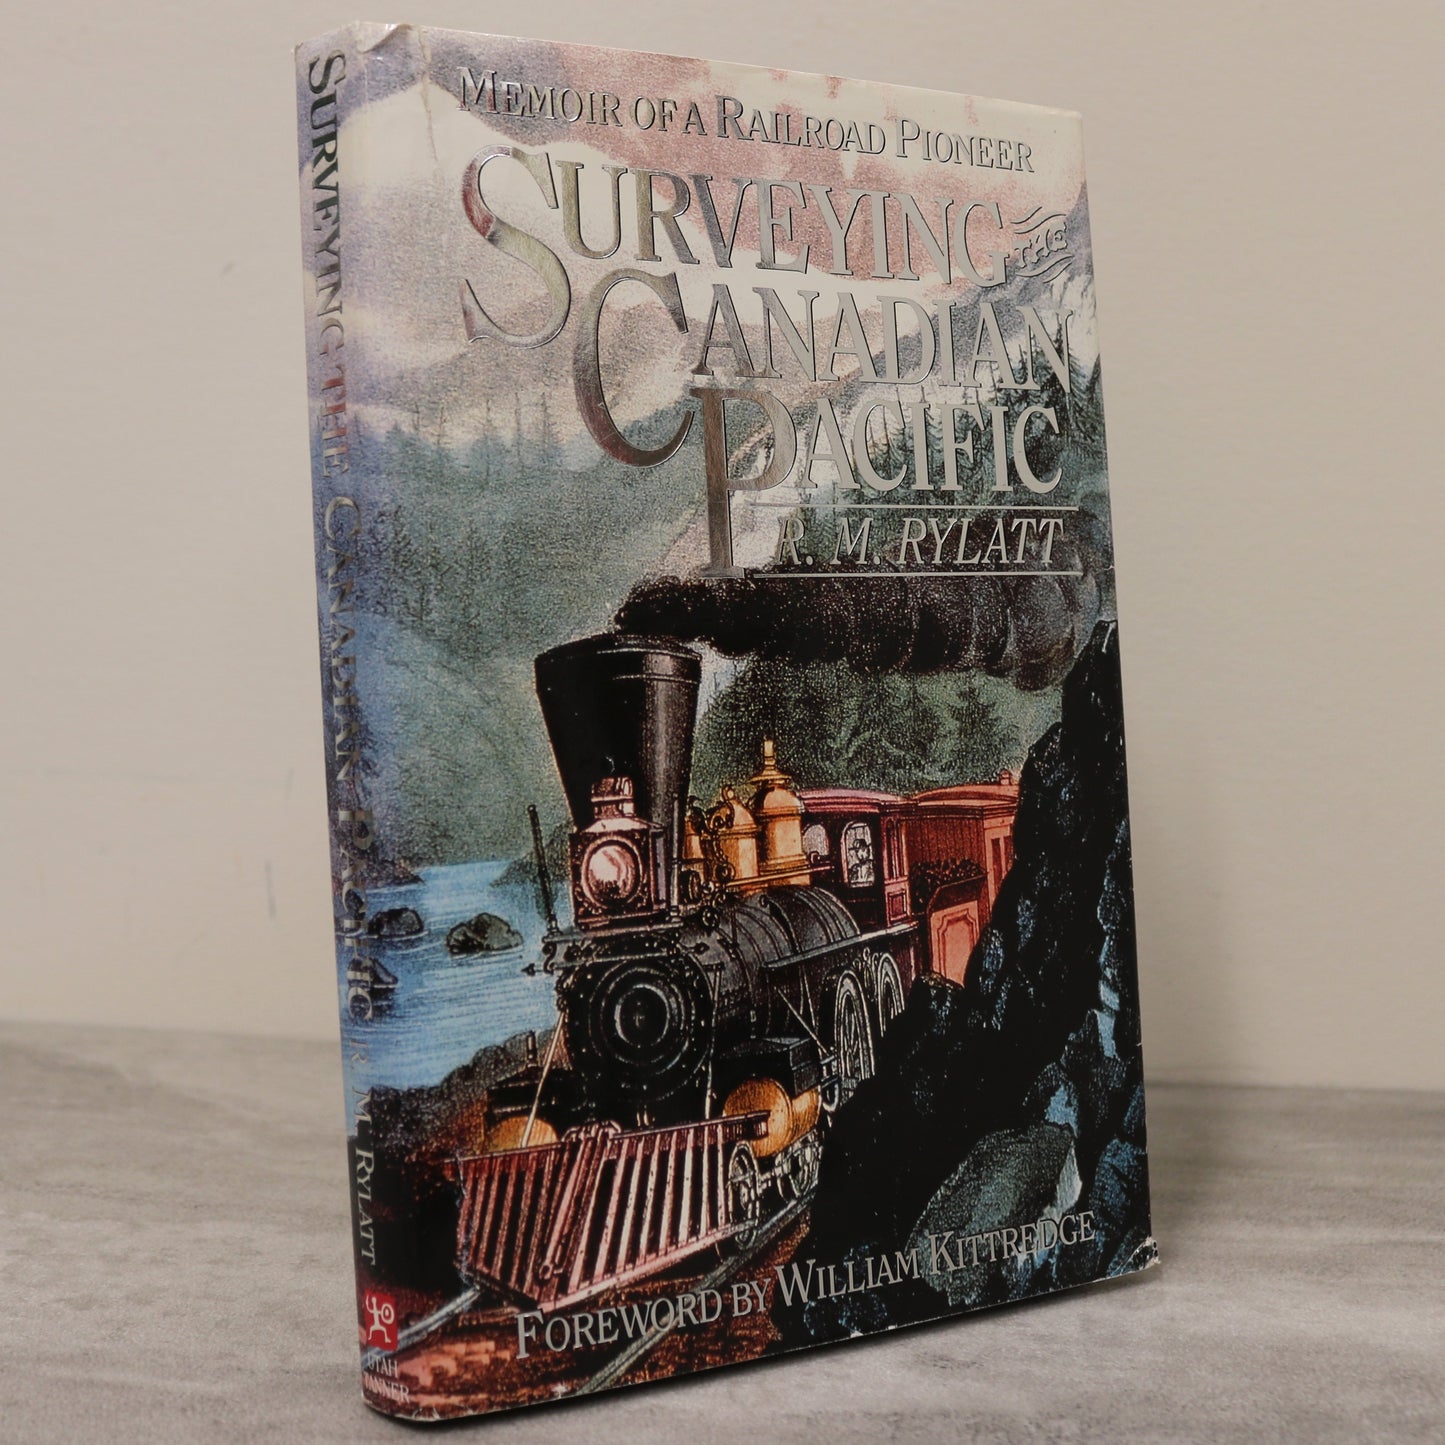 Surveying Canadian Pacific Railway CPR Canada Railroad History Used Book